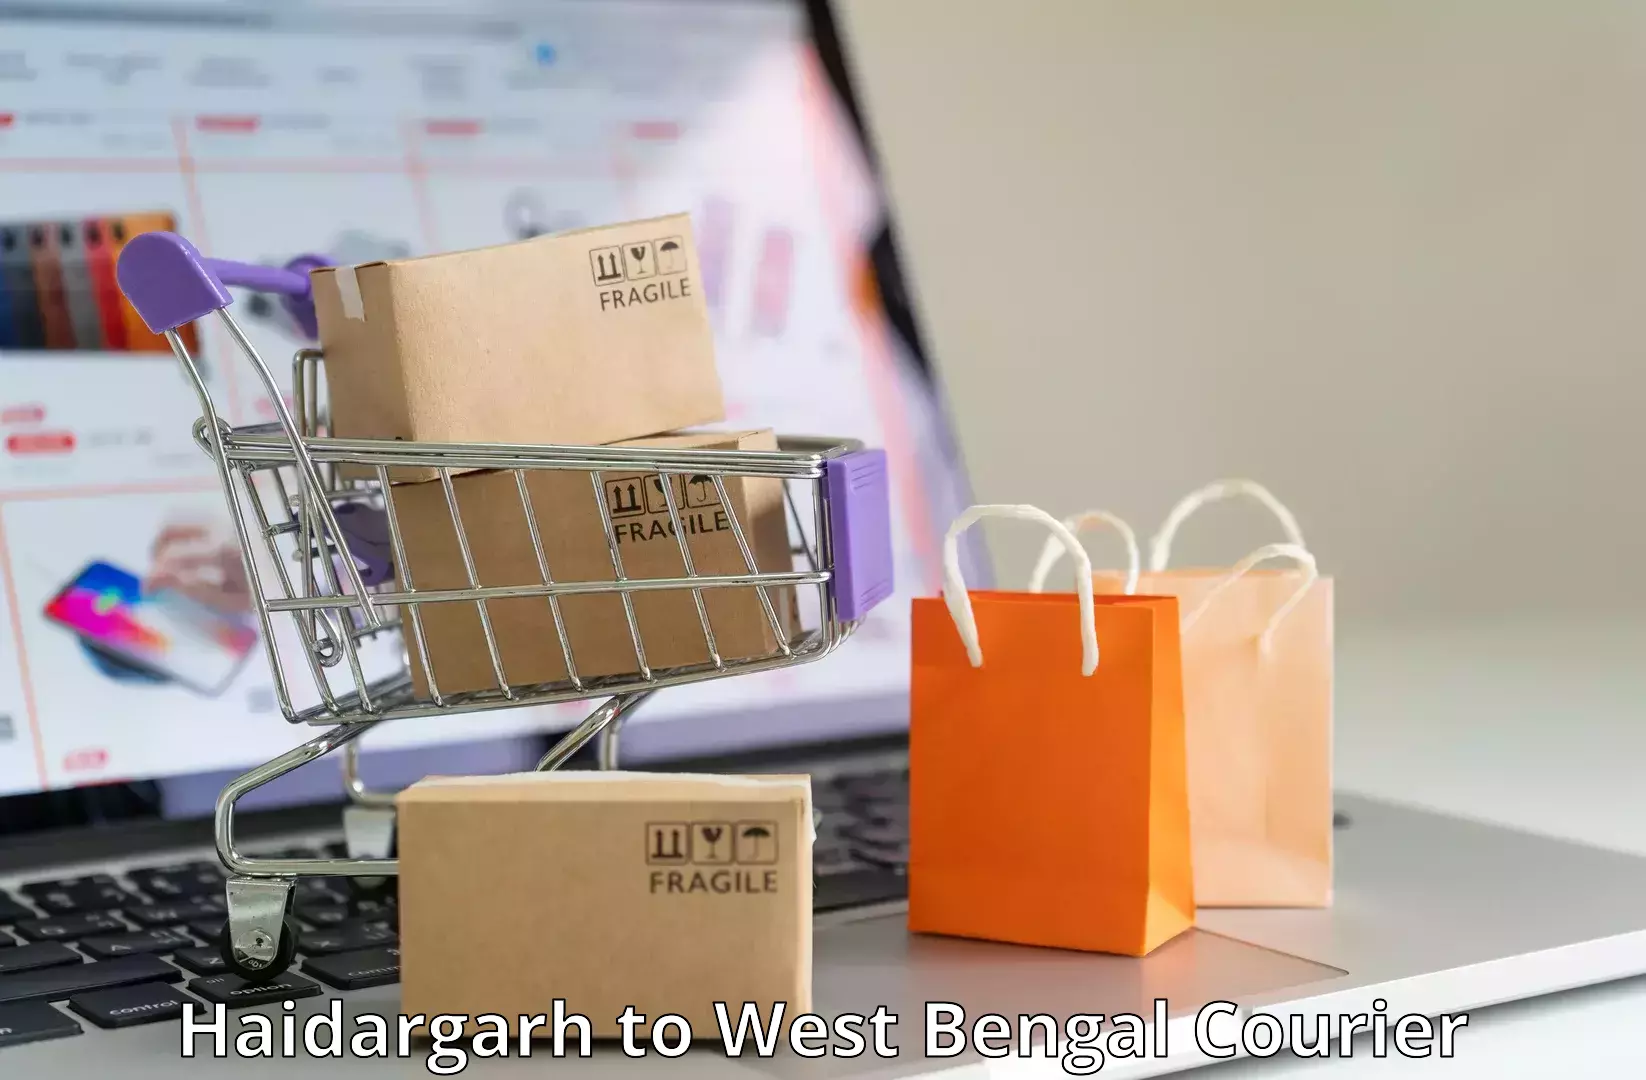 Subscription-based courier Haidargarh to Belda